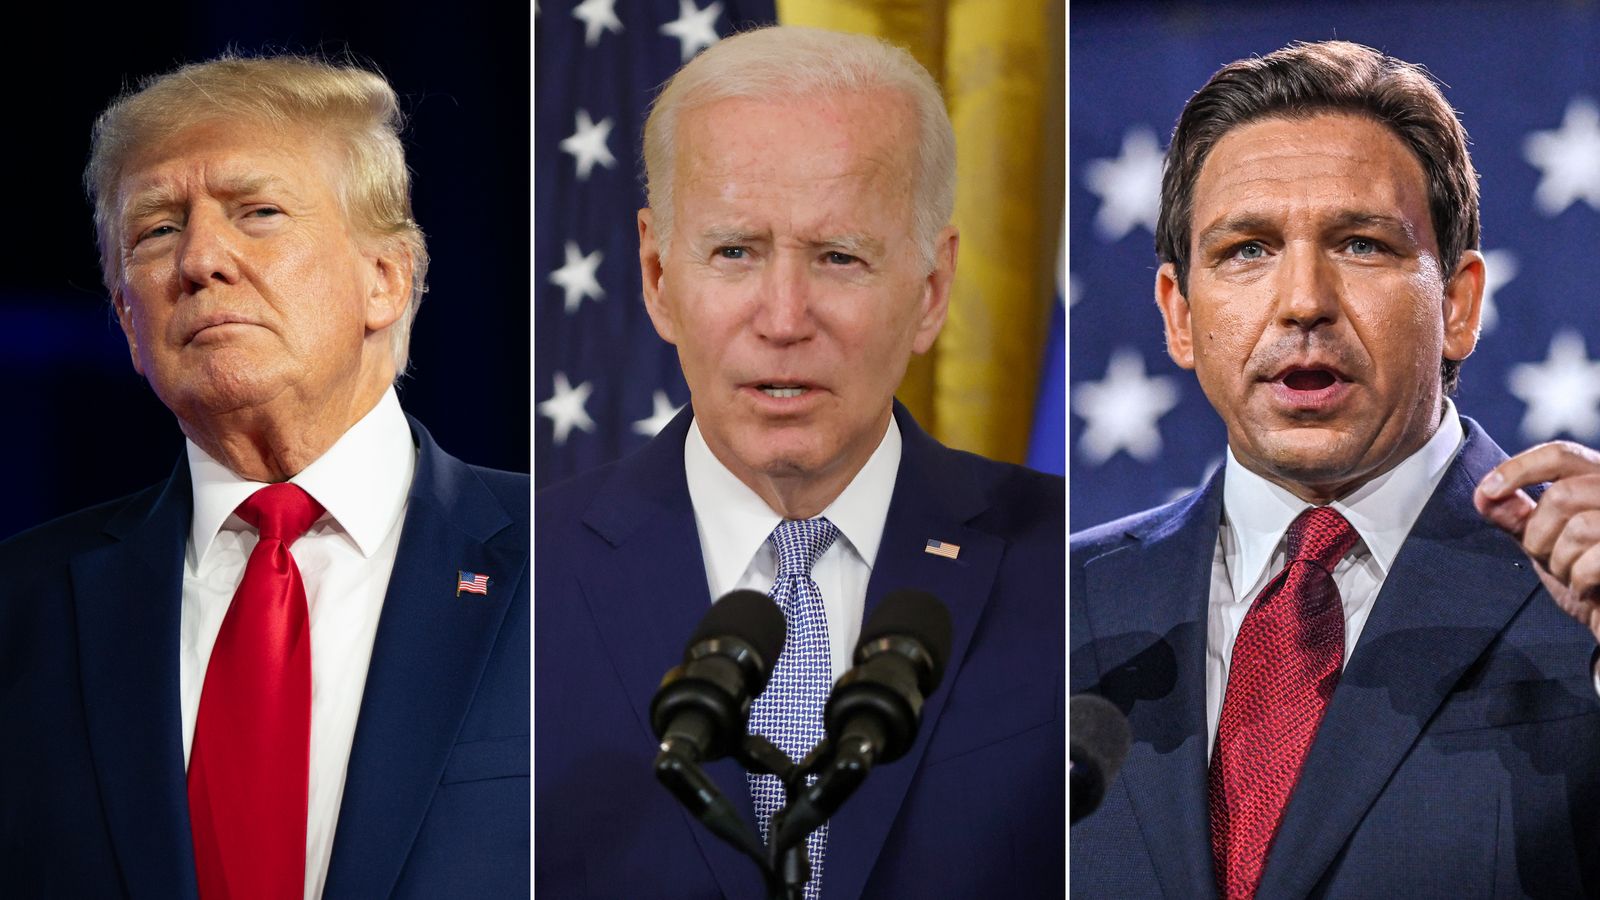 State of play: The 2024 Republican primary field takes shape